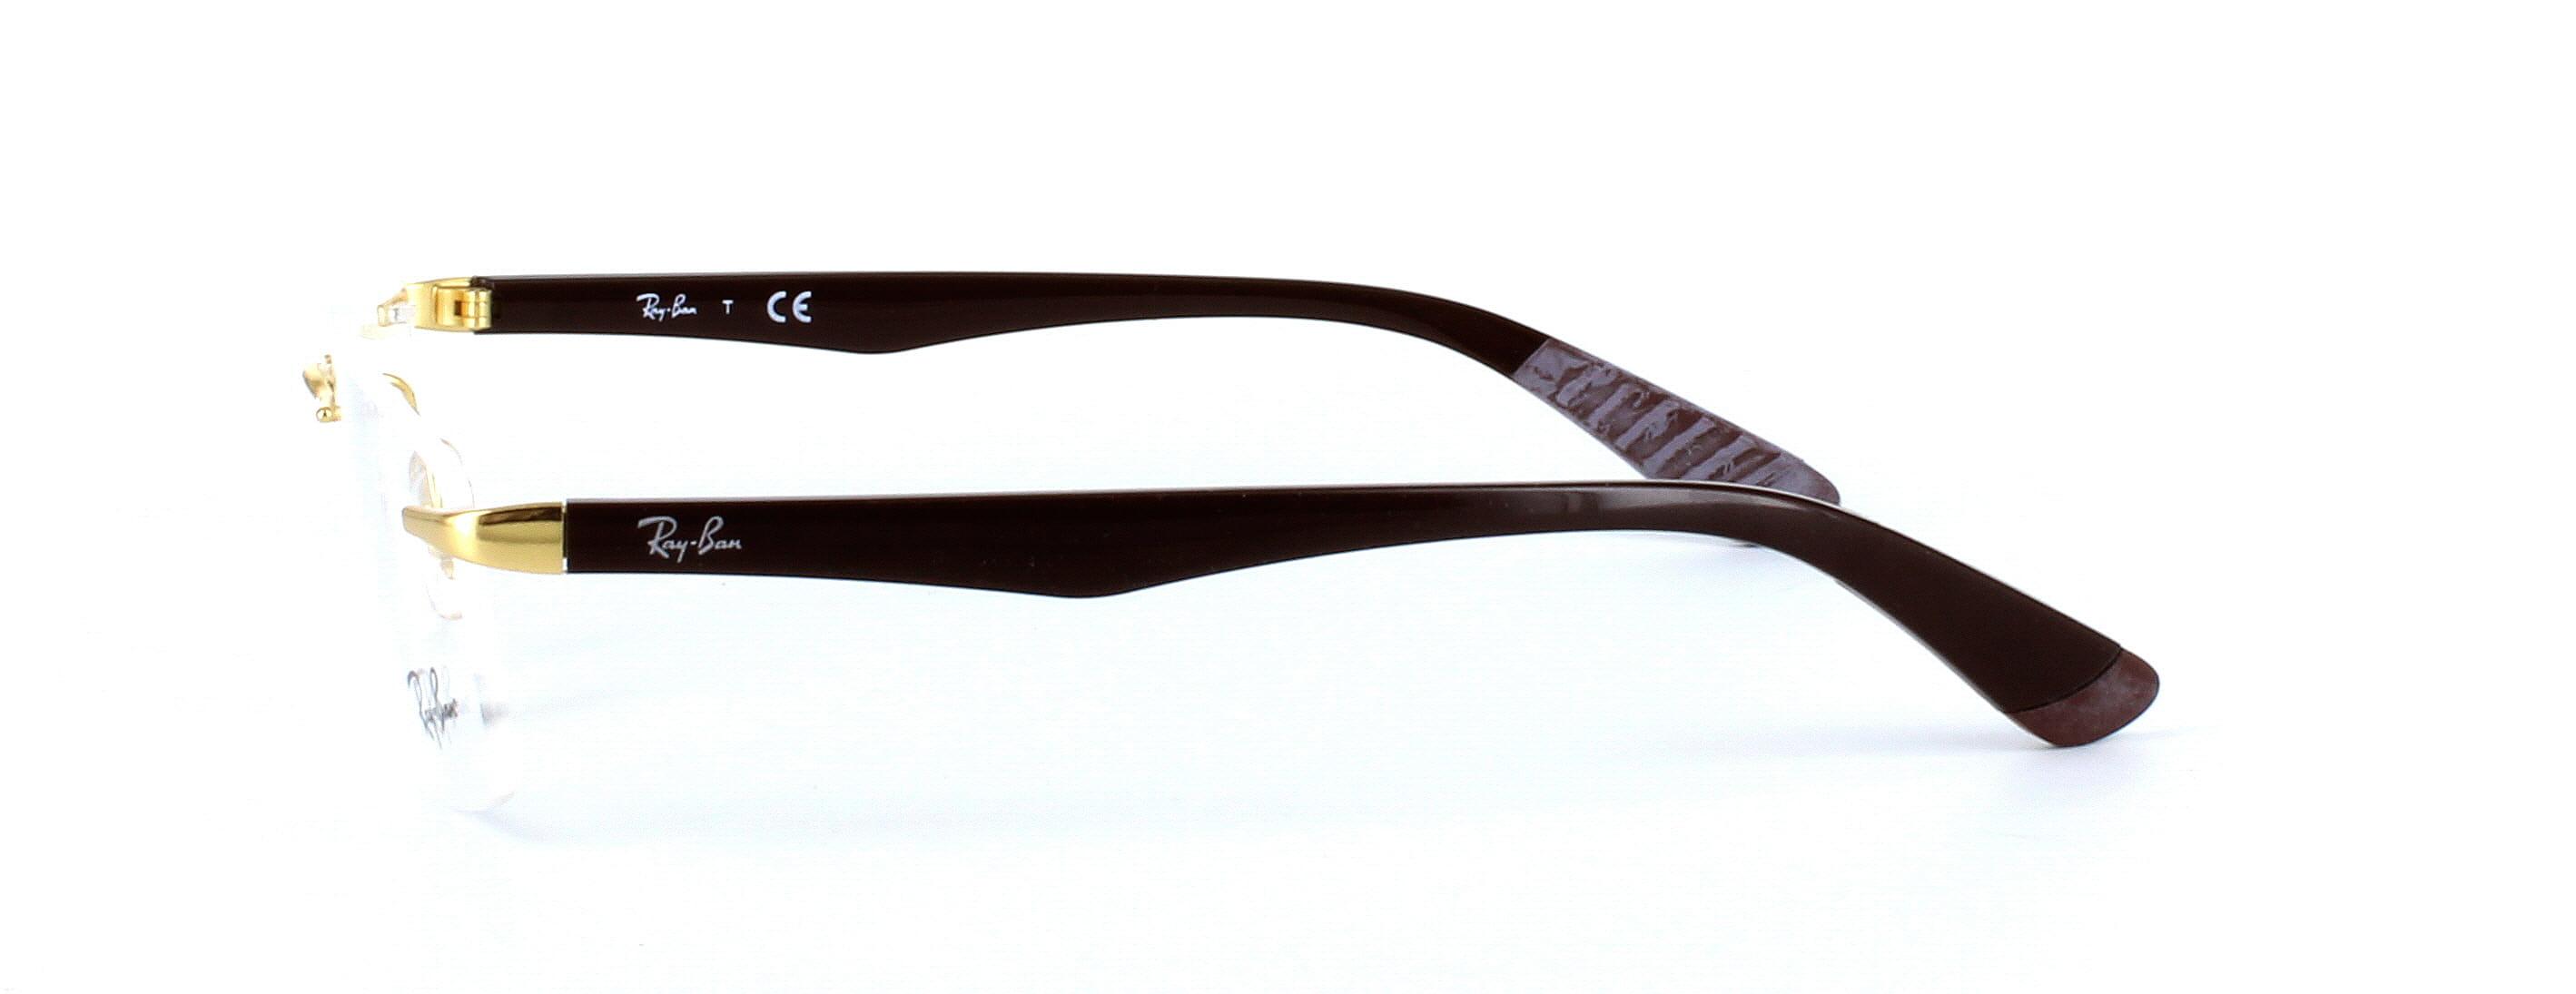 Unisex rimless glasses - Ray Ban 64011- image view 2